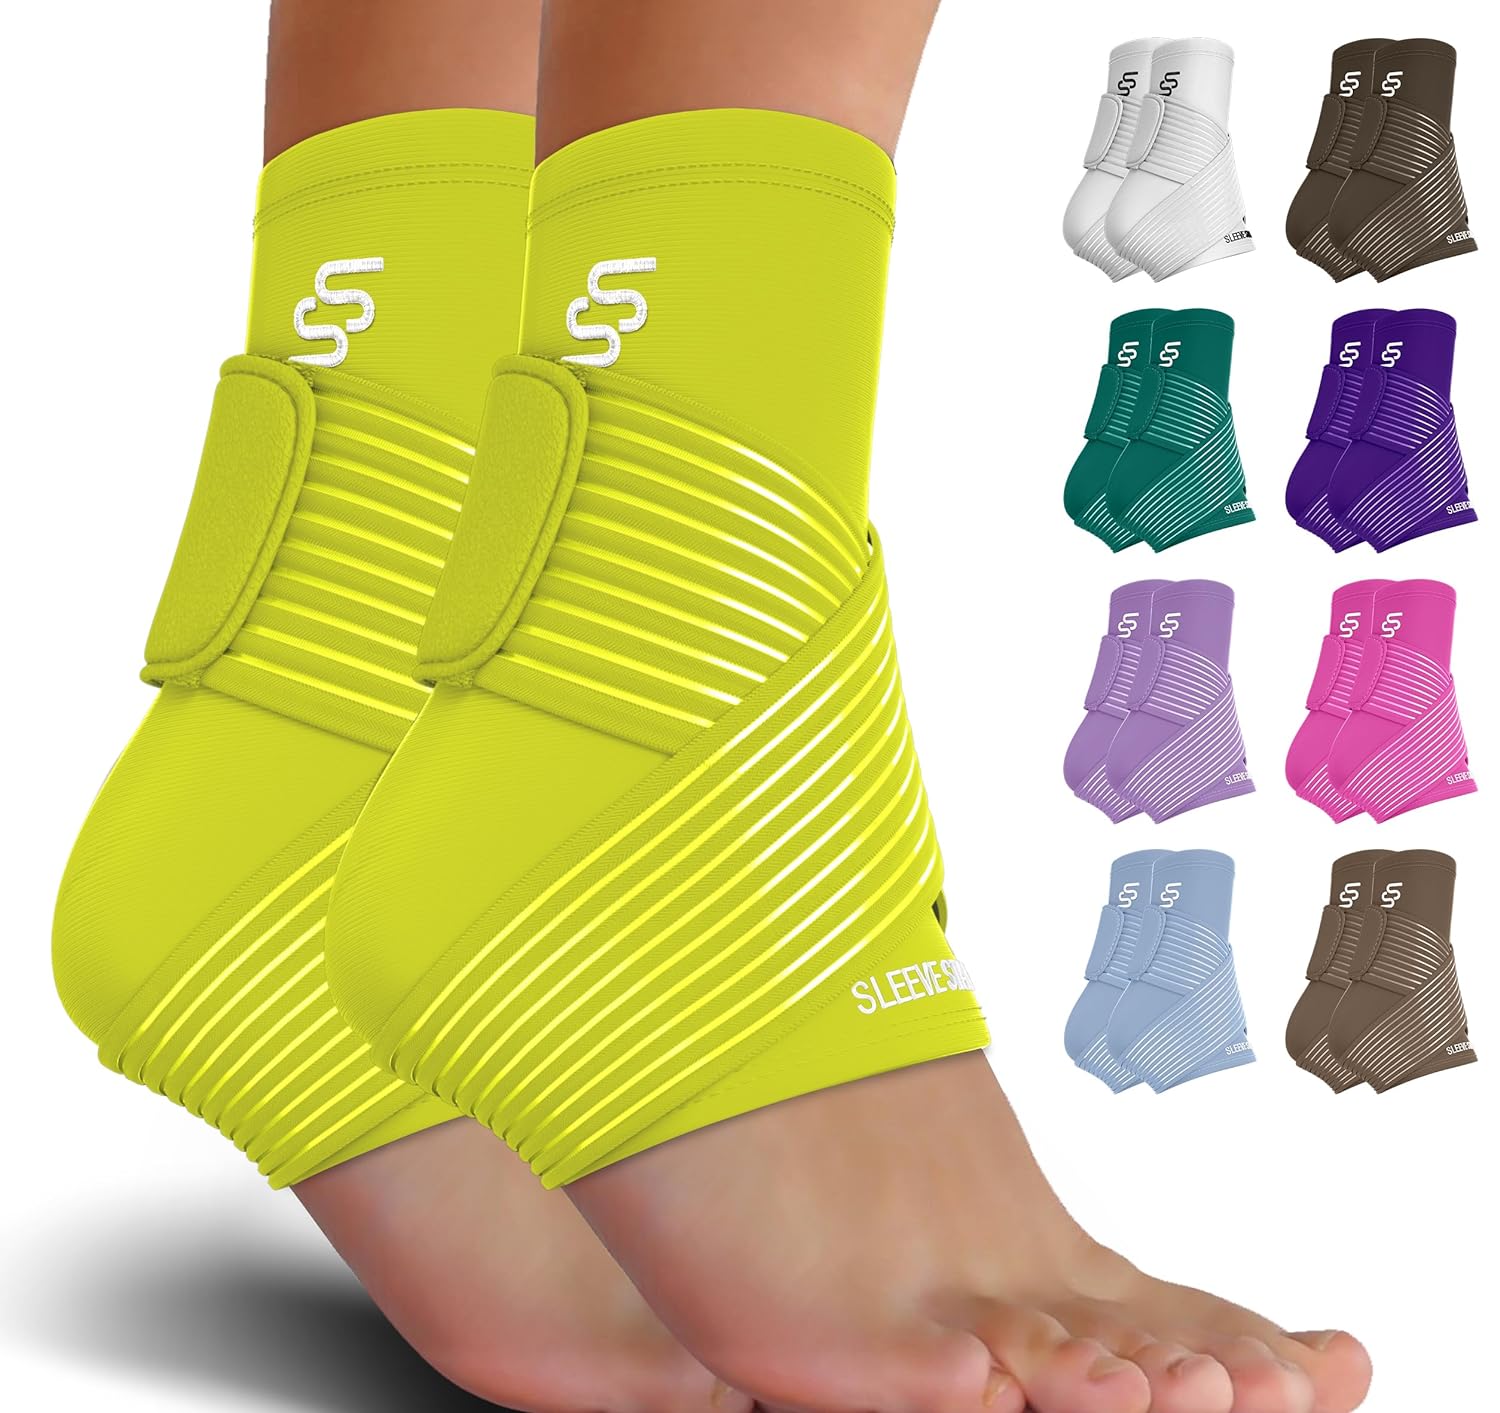 Save Big on Sleeve Stars Ankle Support! Limited Stock, Grab It Now - Only £20.79